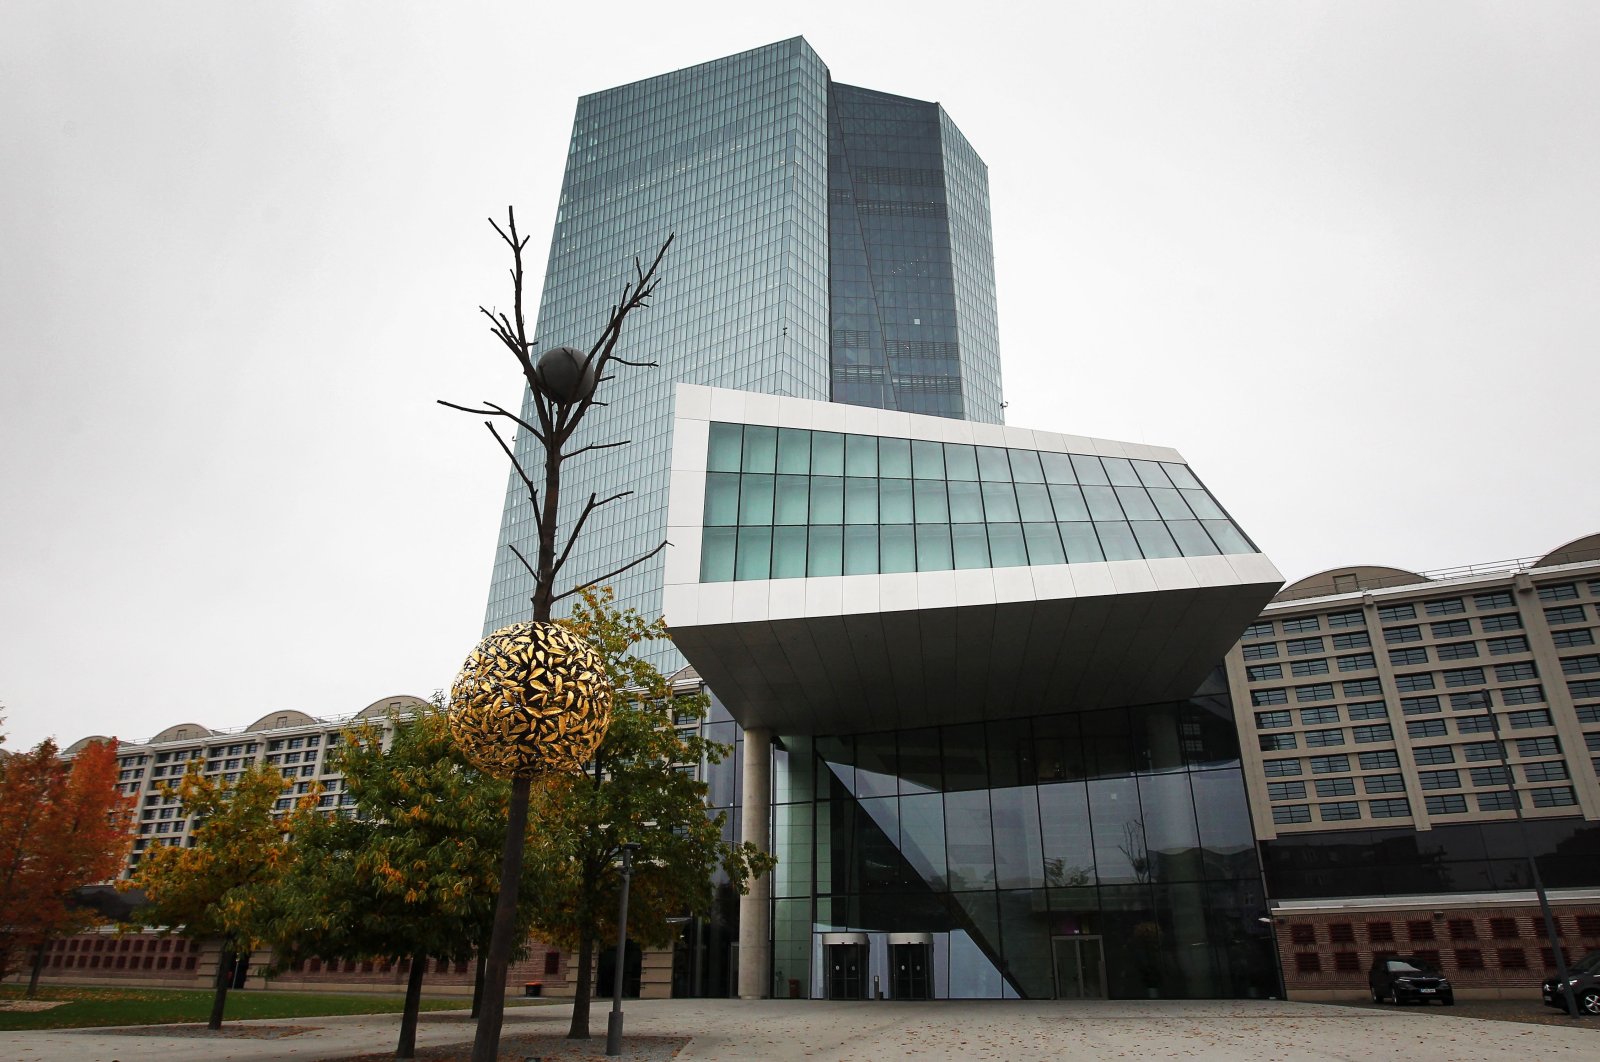 The European Central Bank (ECB) building in Frankfurt am Main, western Germany, Oct. 28, 2021. (AFP Photo)